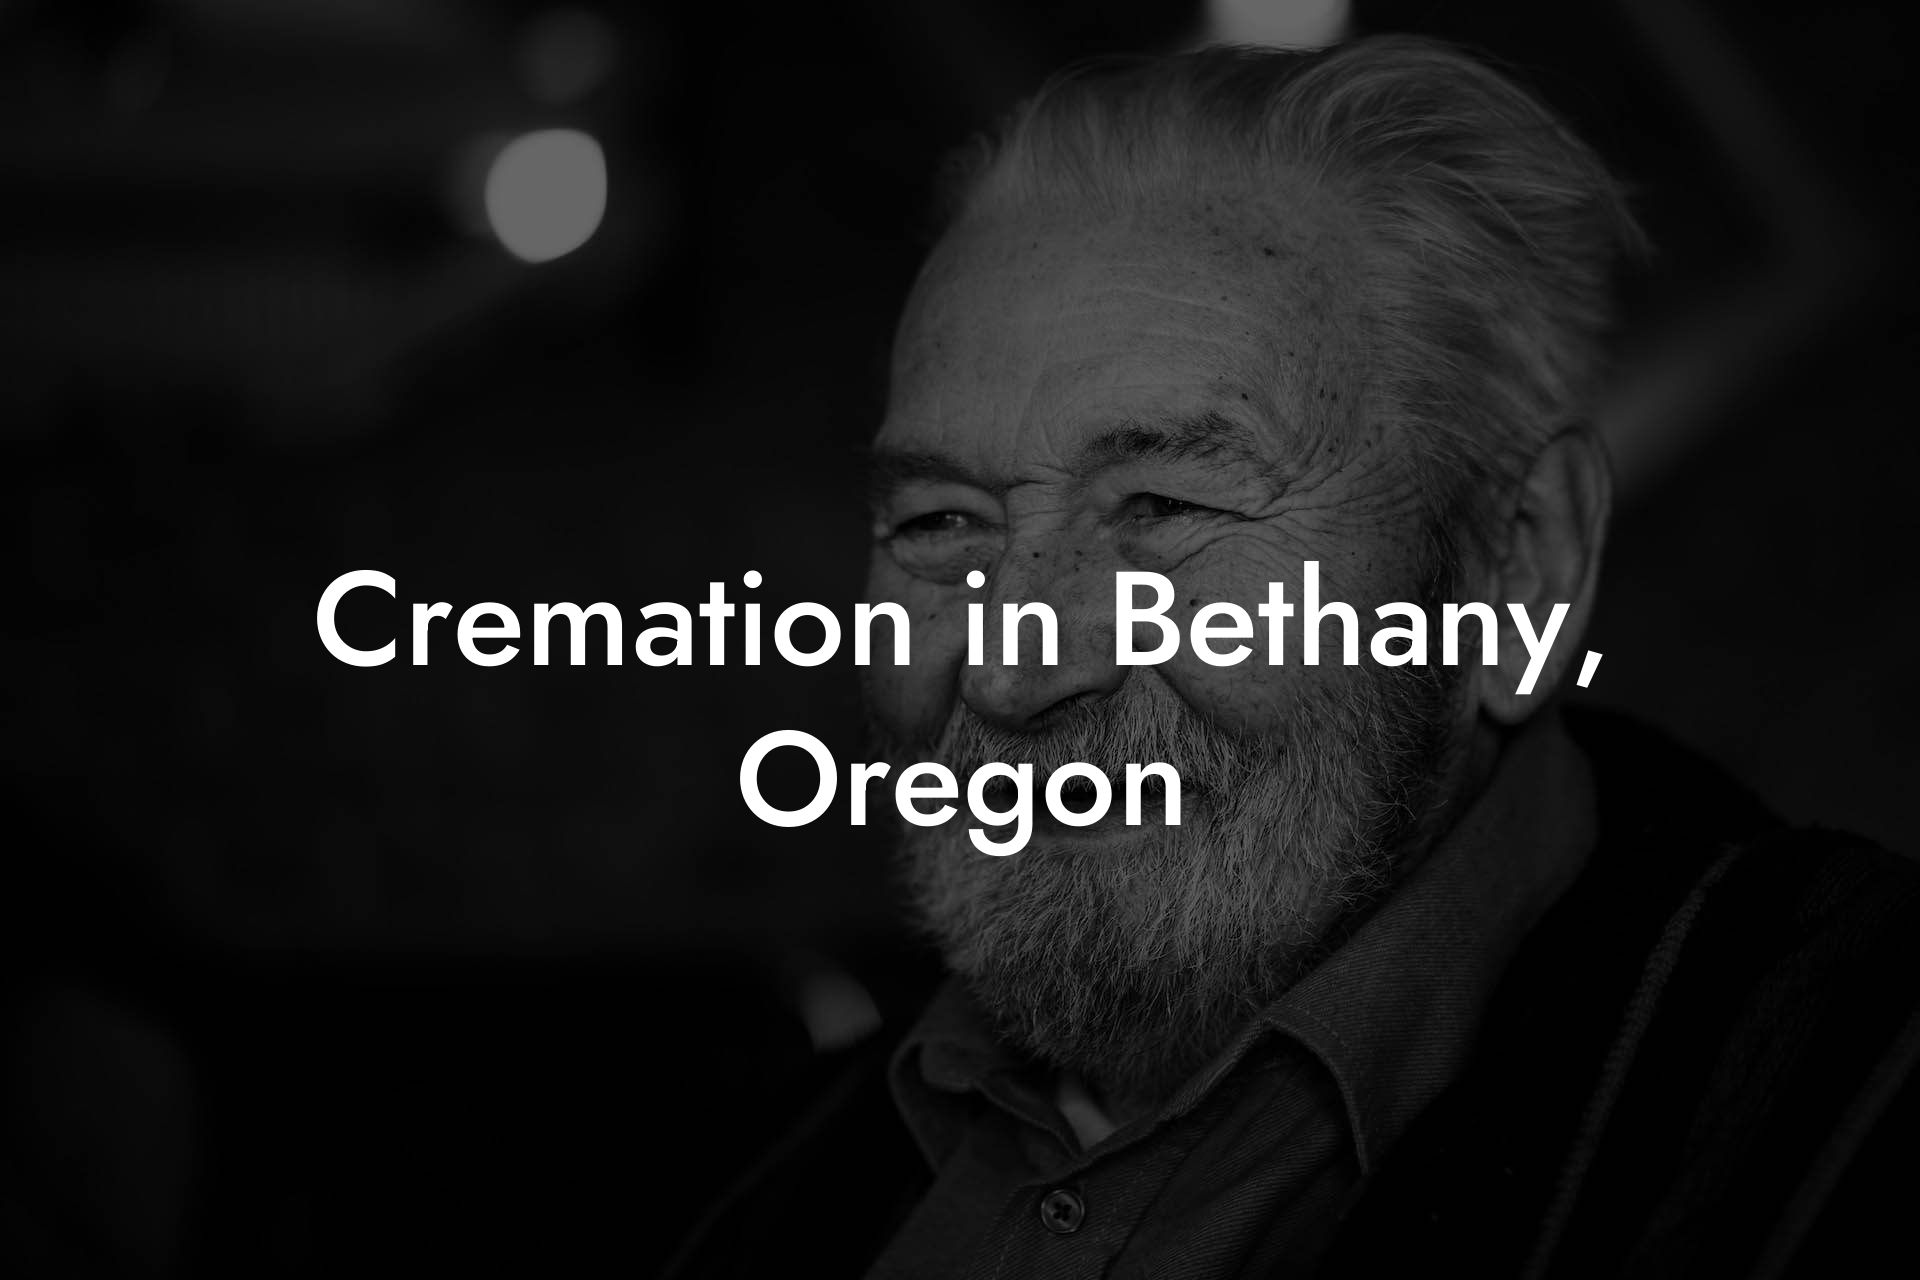 Cremation in Bethany, Oregon